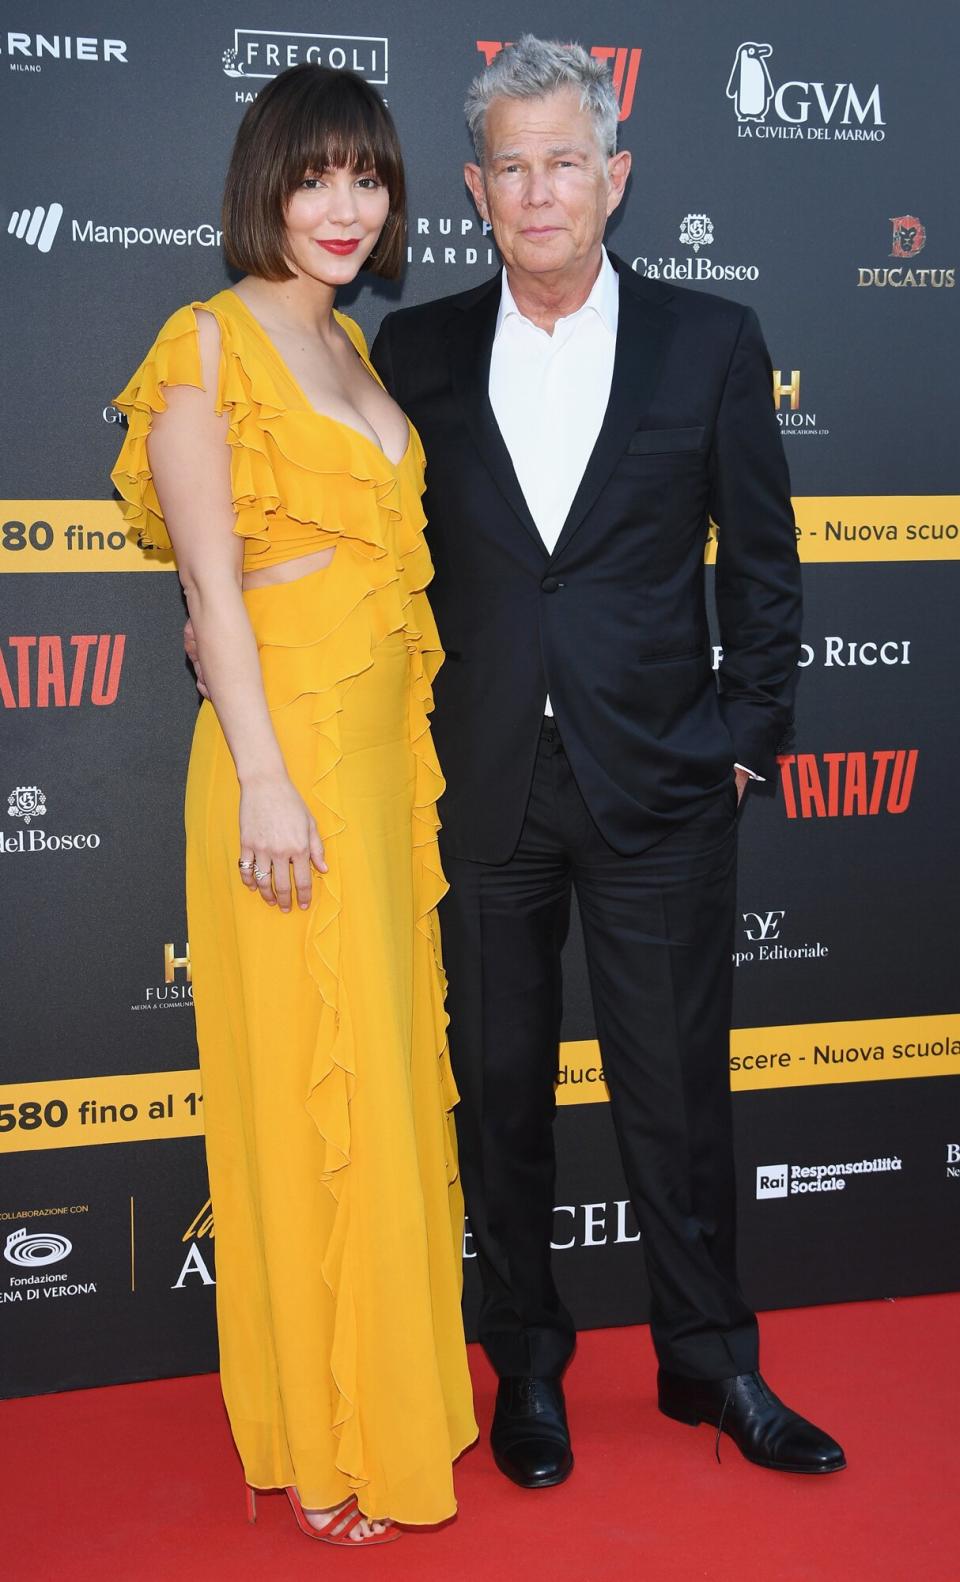 Katharine Mcphee and David Foster attends Celebrity Fight Night at Arena di Verona on September 8, 2018 in Verona, Italy